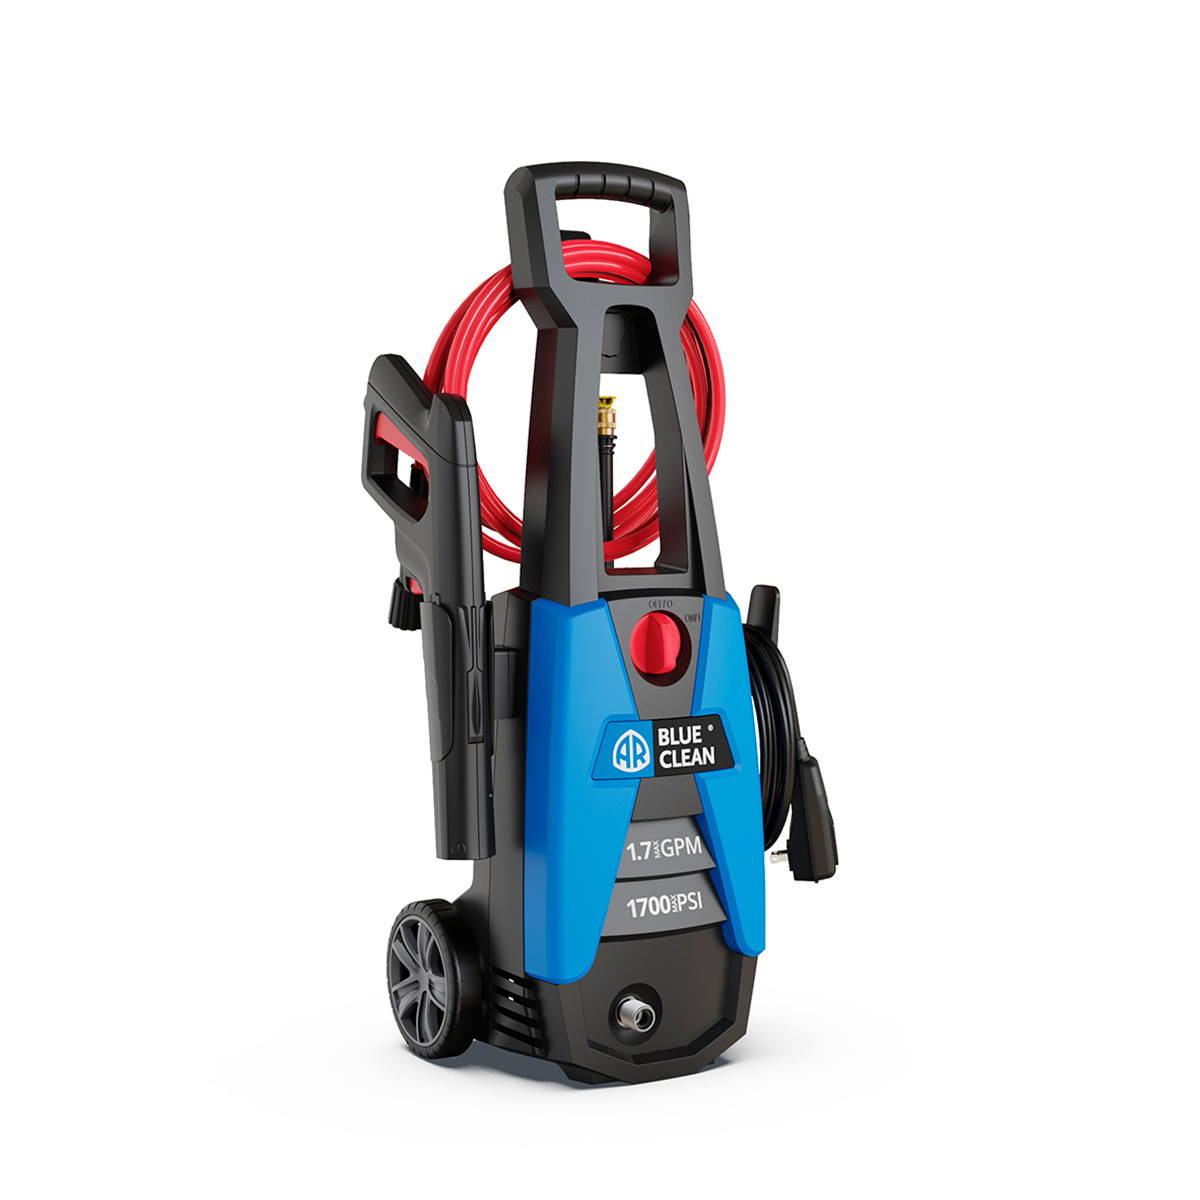 How can I find out what model and serial of the pressure washer?